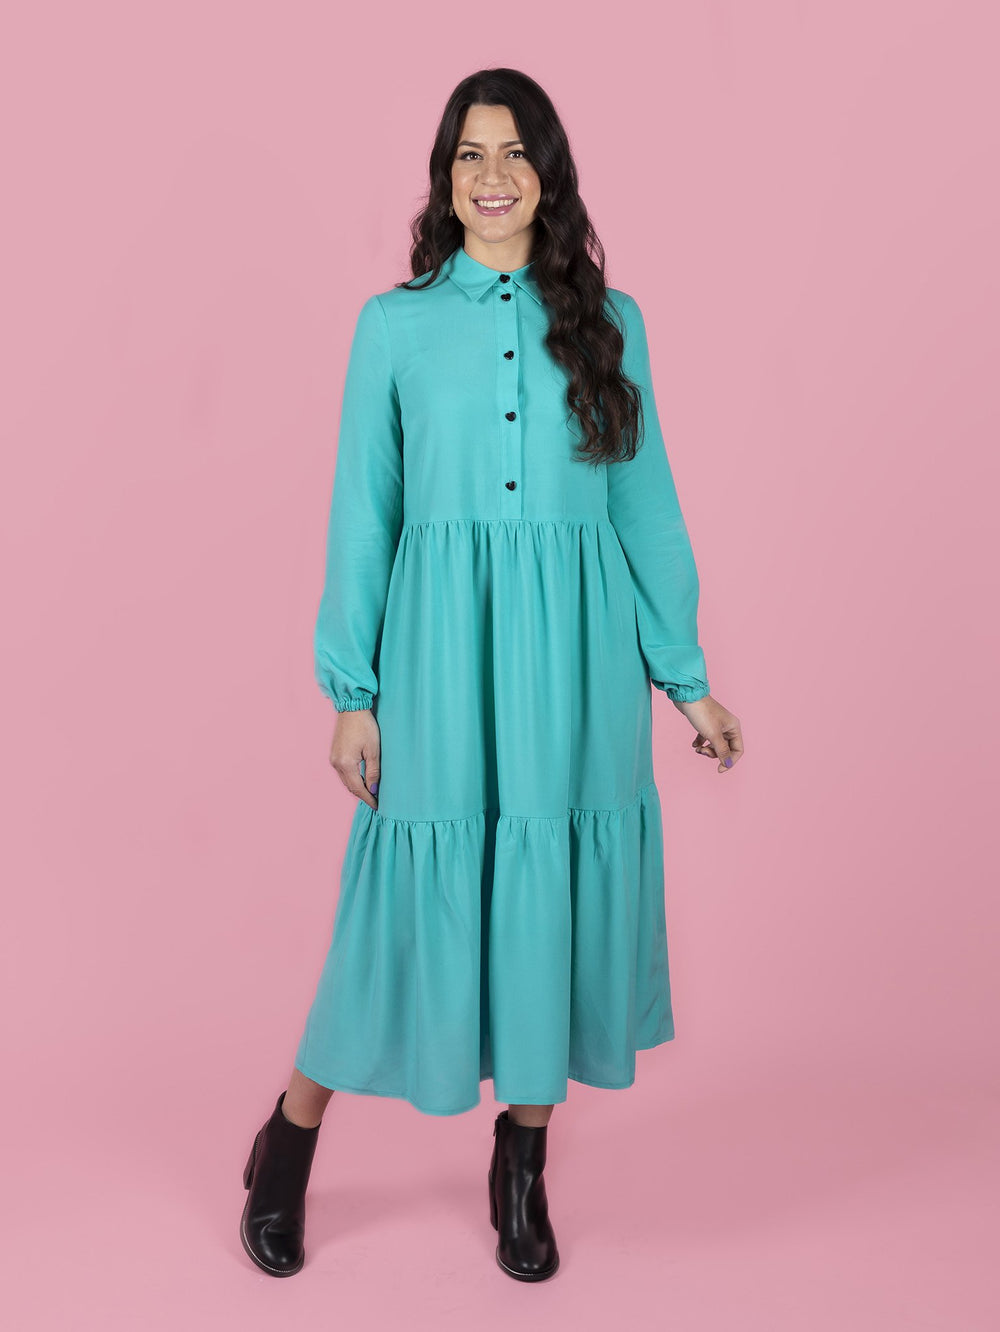 Tilly & The Buttons LYRA Shirt Dress Pattern from Jaycotts Sewing Supplies